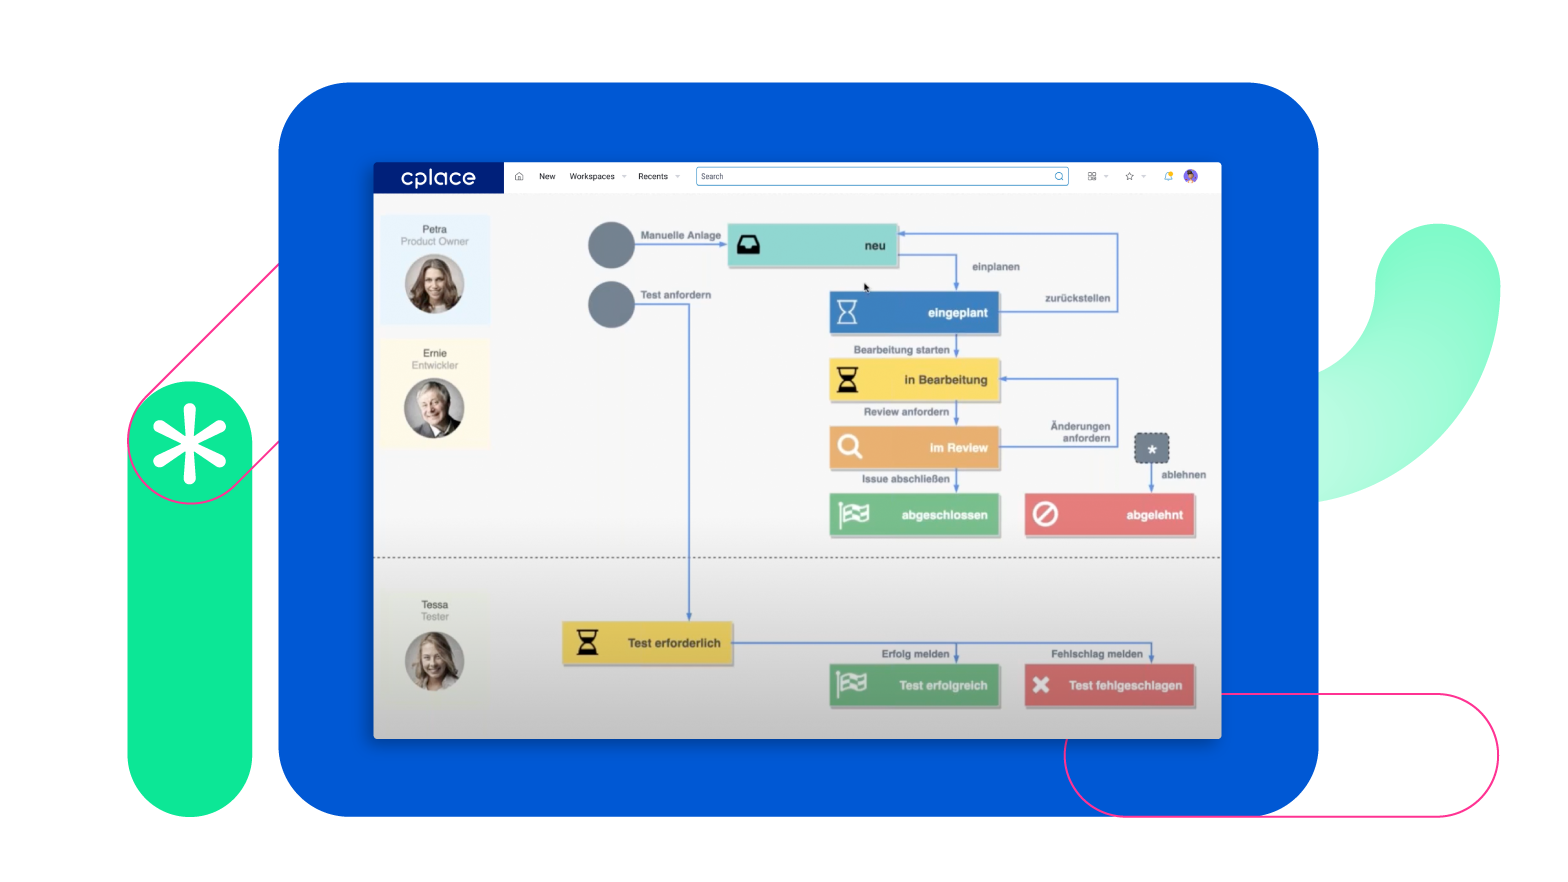 The Workflow Manager supports users in digitizing and automating business processes